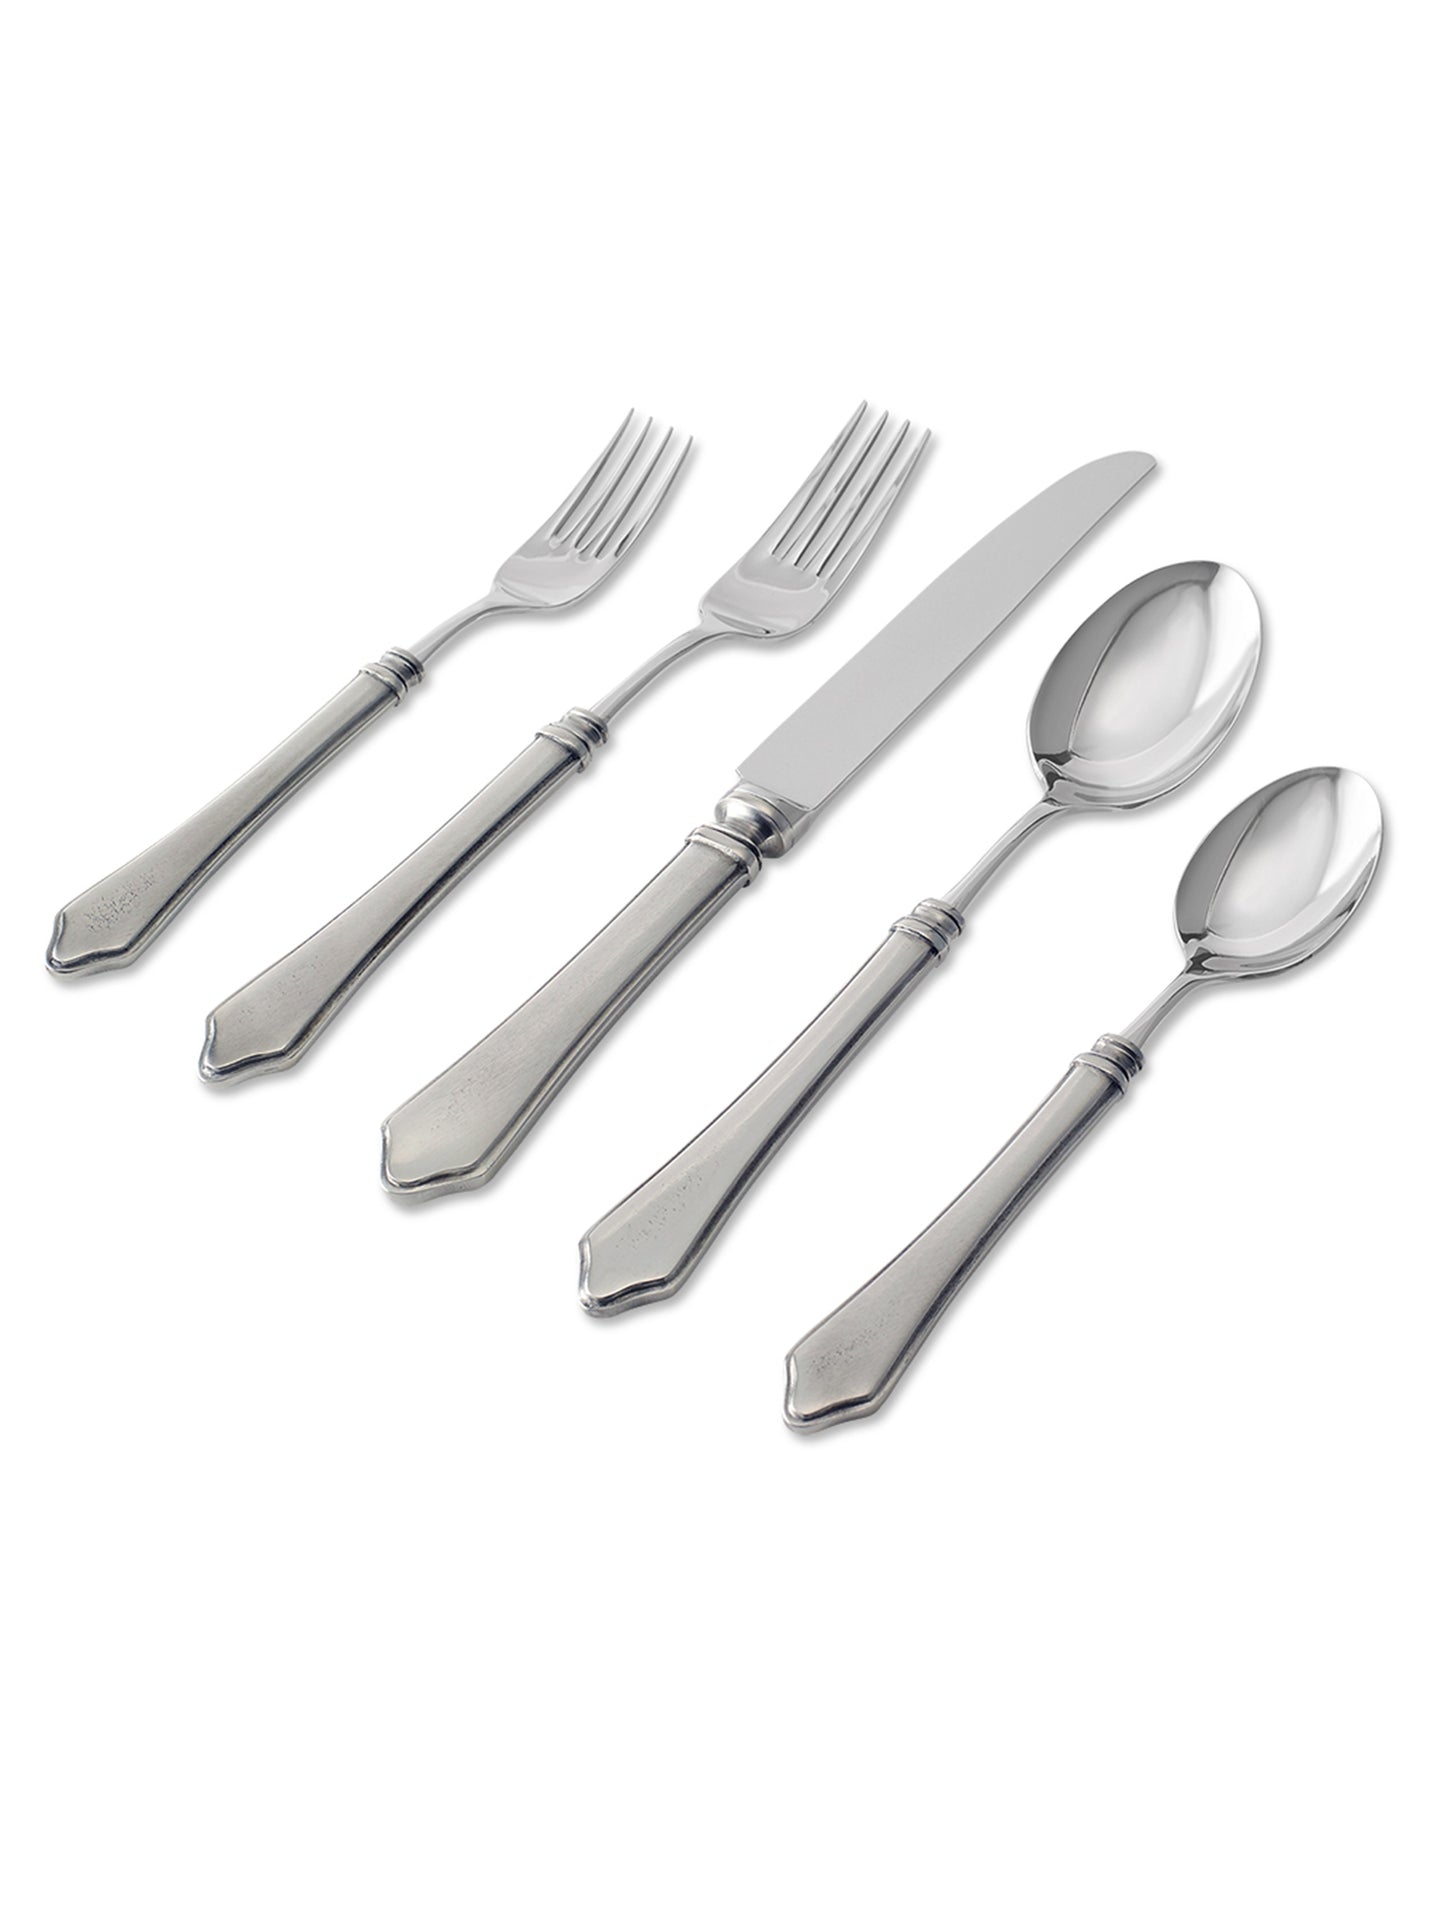 MATCH Pewter Violetta 5 Piece Place Setting Weston Table